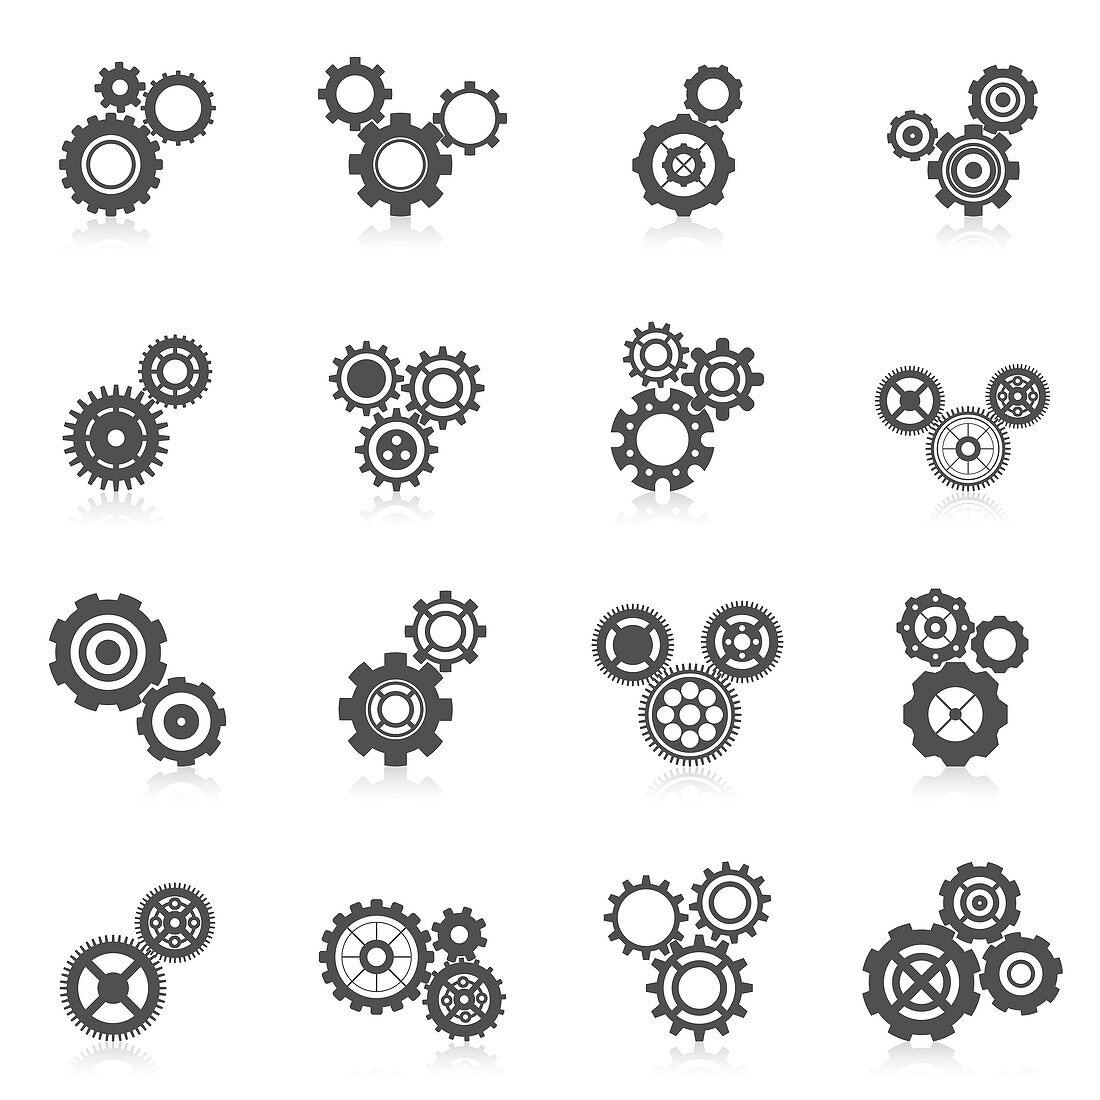 Cog and gear icons, illustration